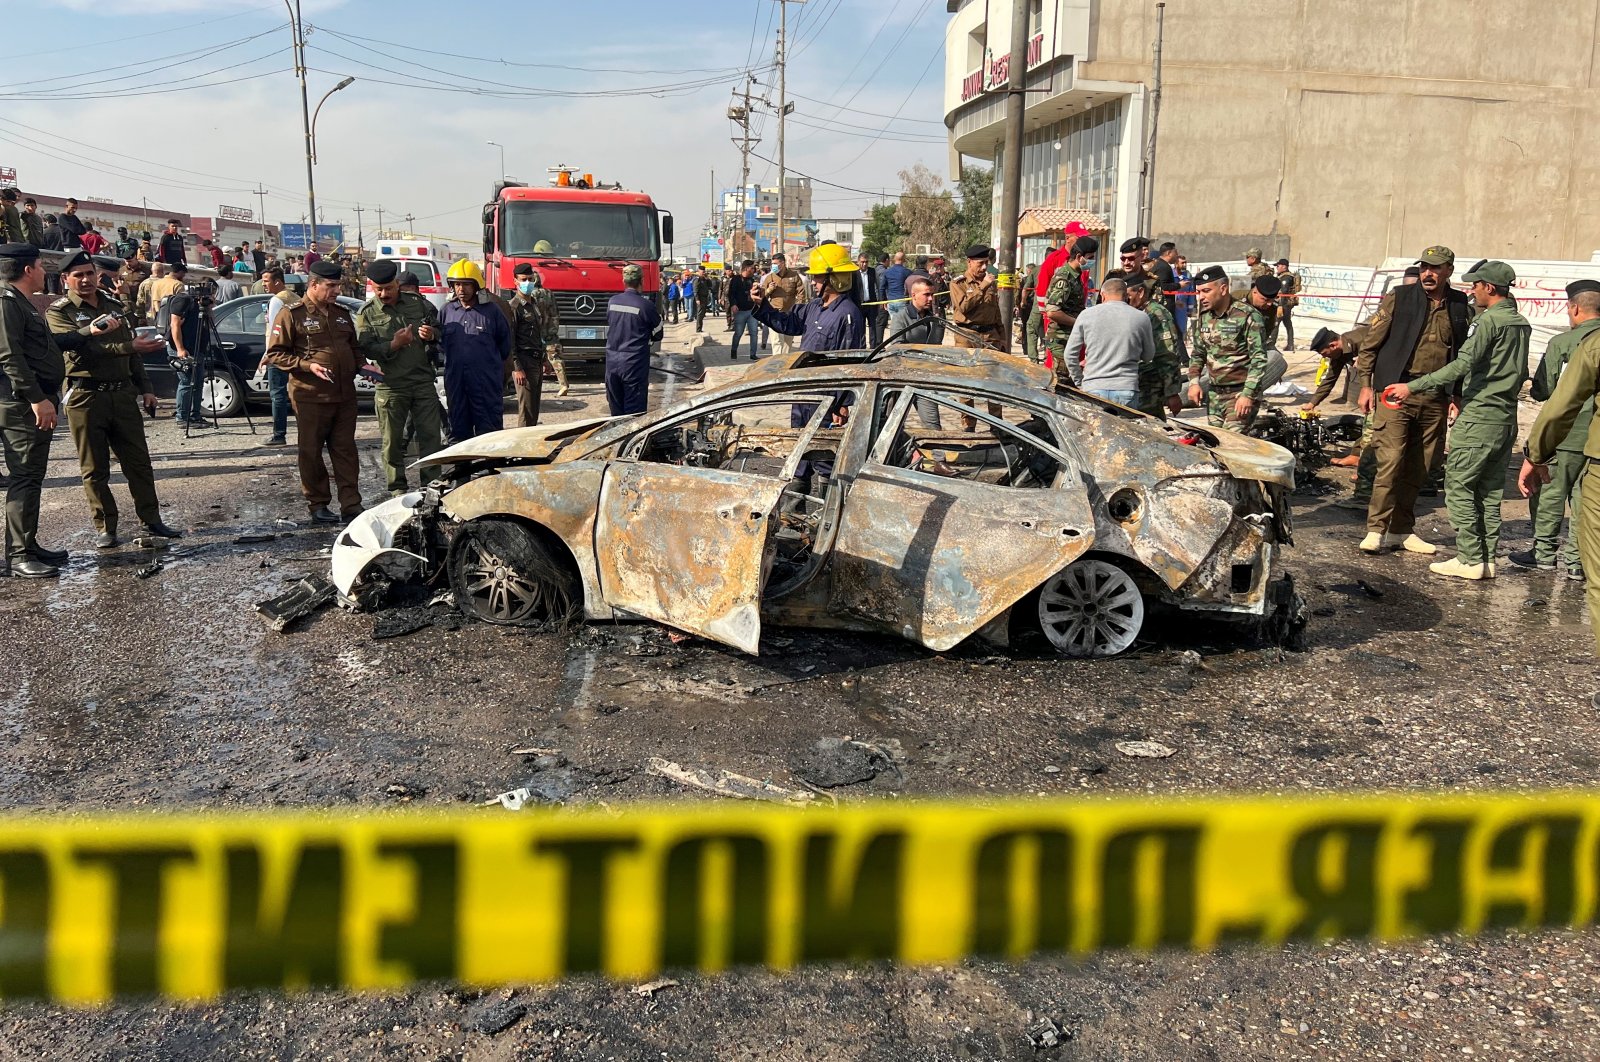 Iraqi security forces inspect the site of an explosion in Basra, Iraq, Dec. 7, 2021. (Reuters Photo)